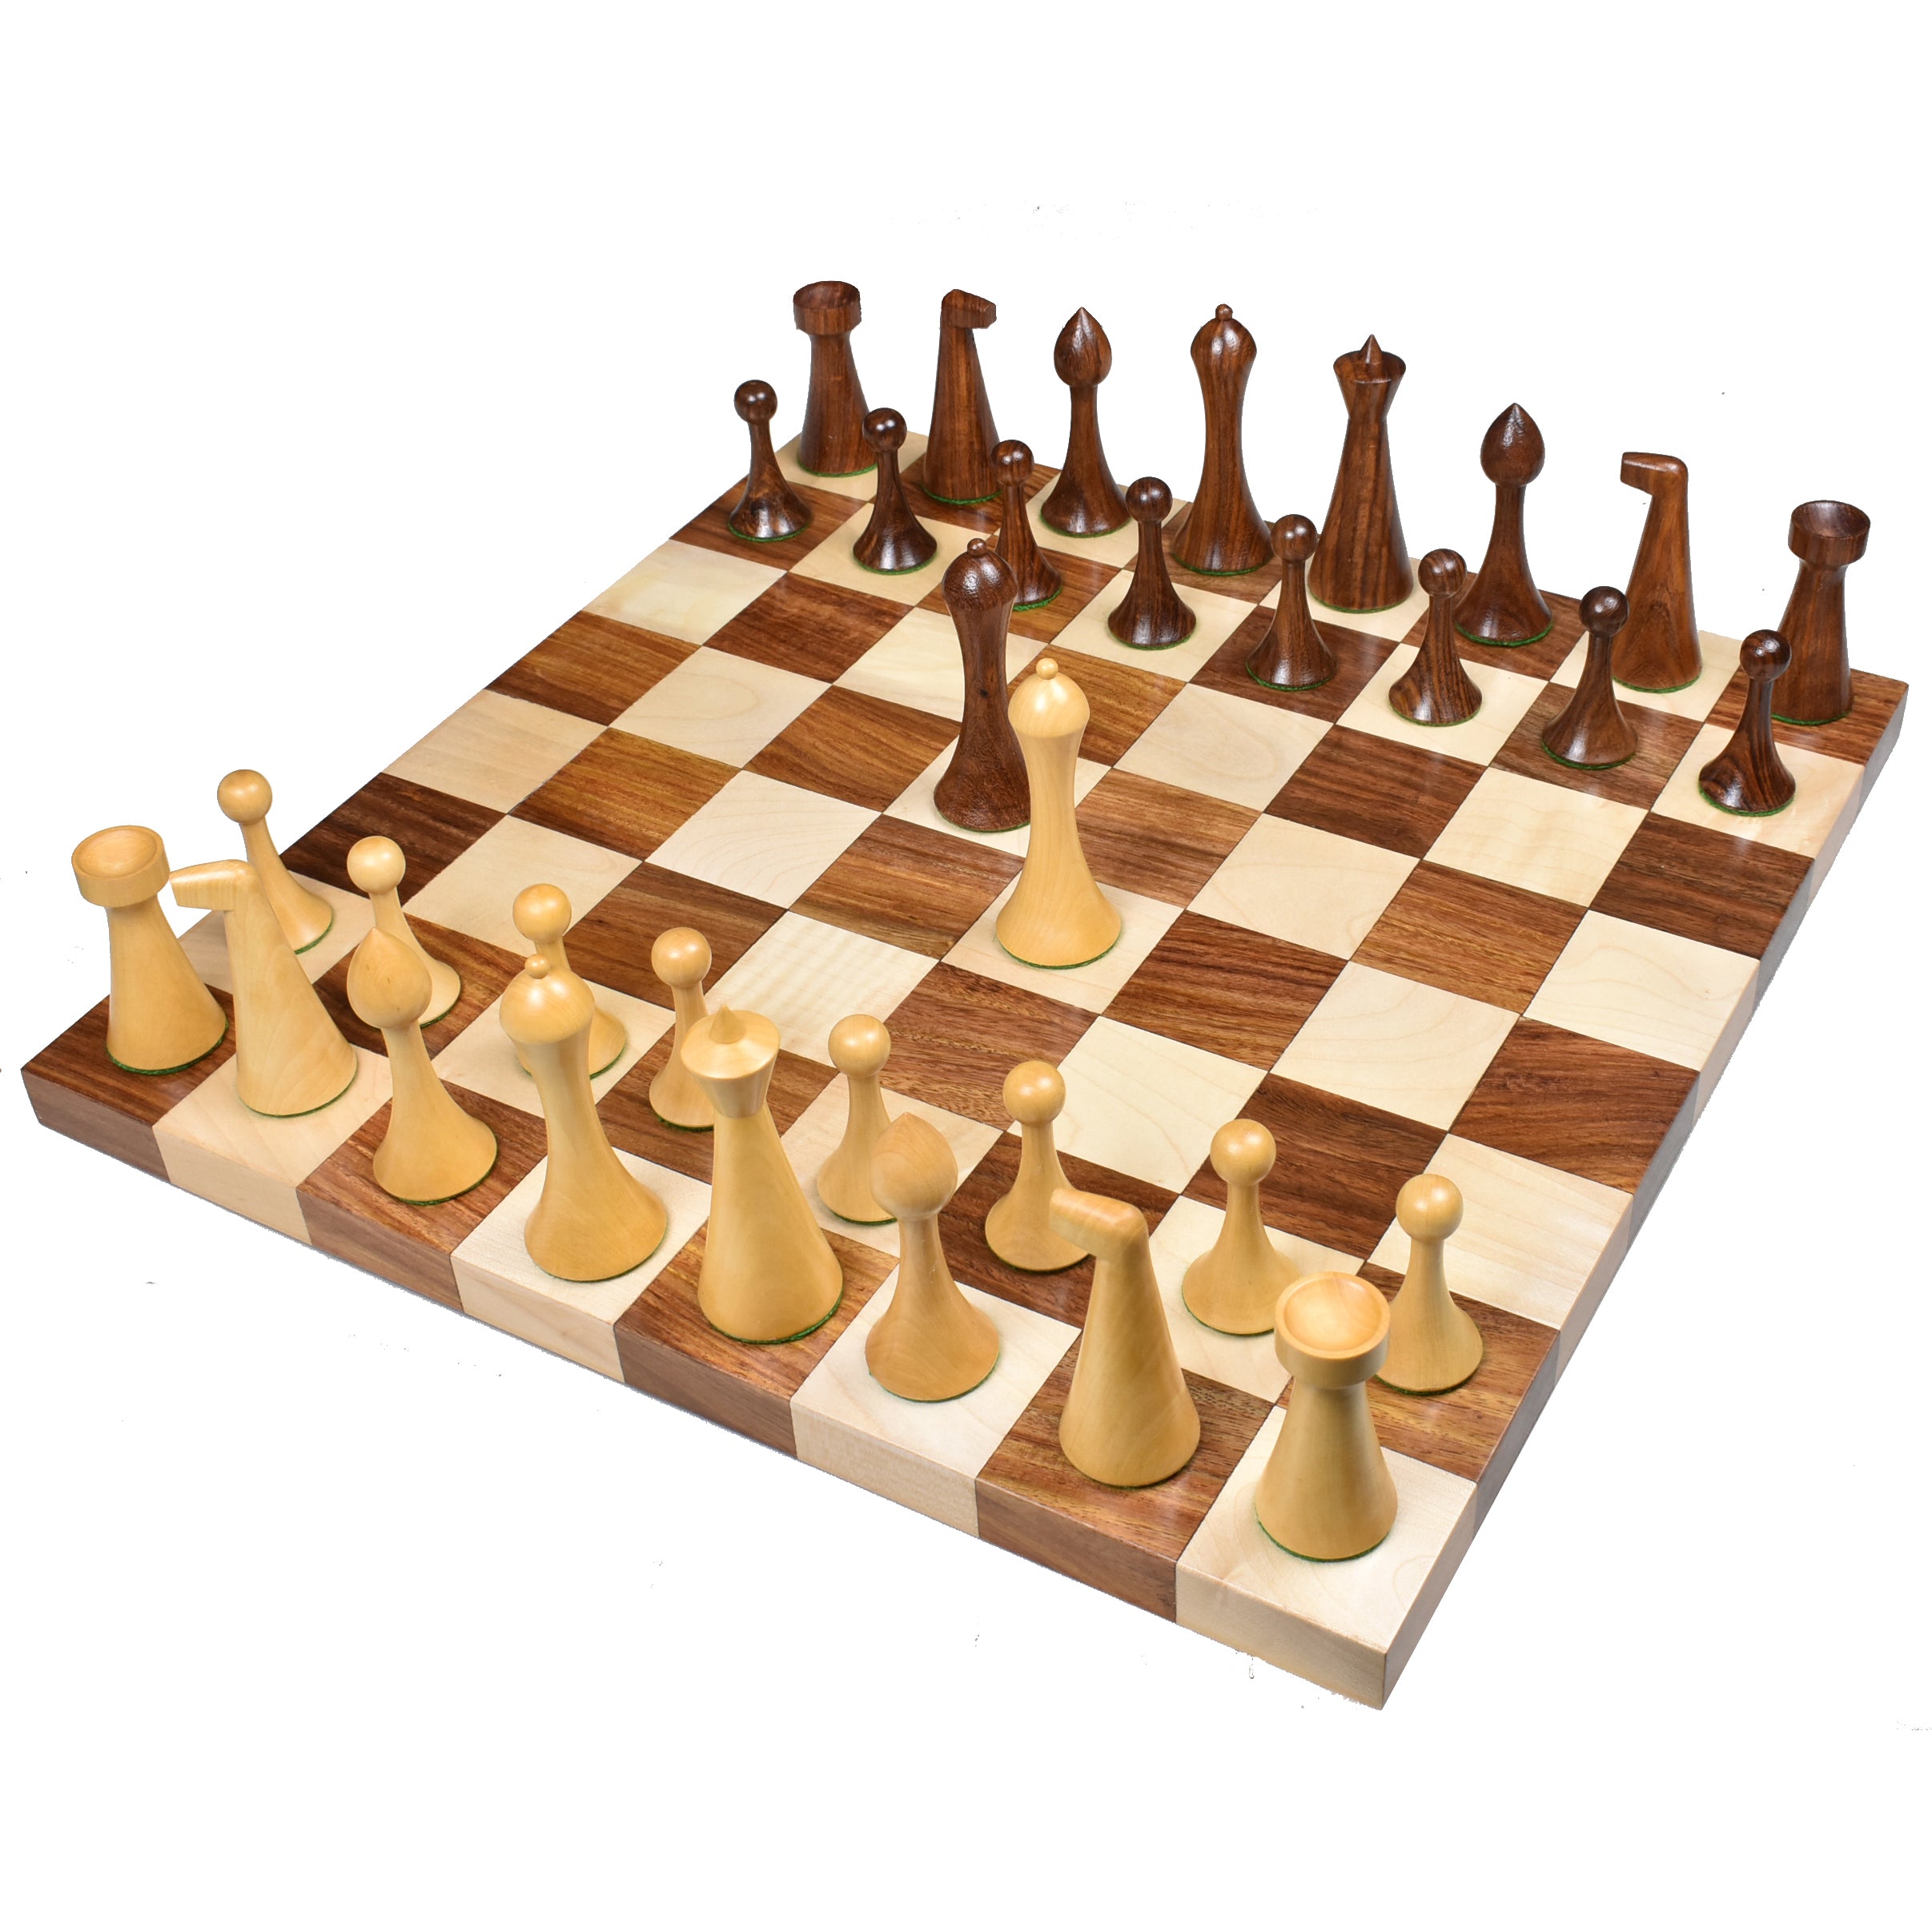 3.6" Herman Ohme Minimalist Combo Chess Set - Pieces in Weighted Golden Rosewood with Board & Box